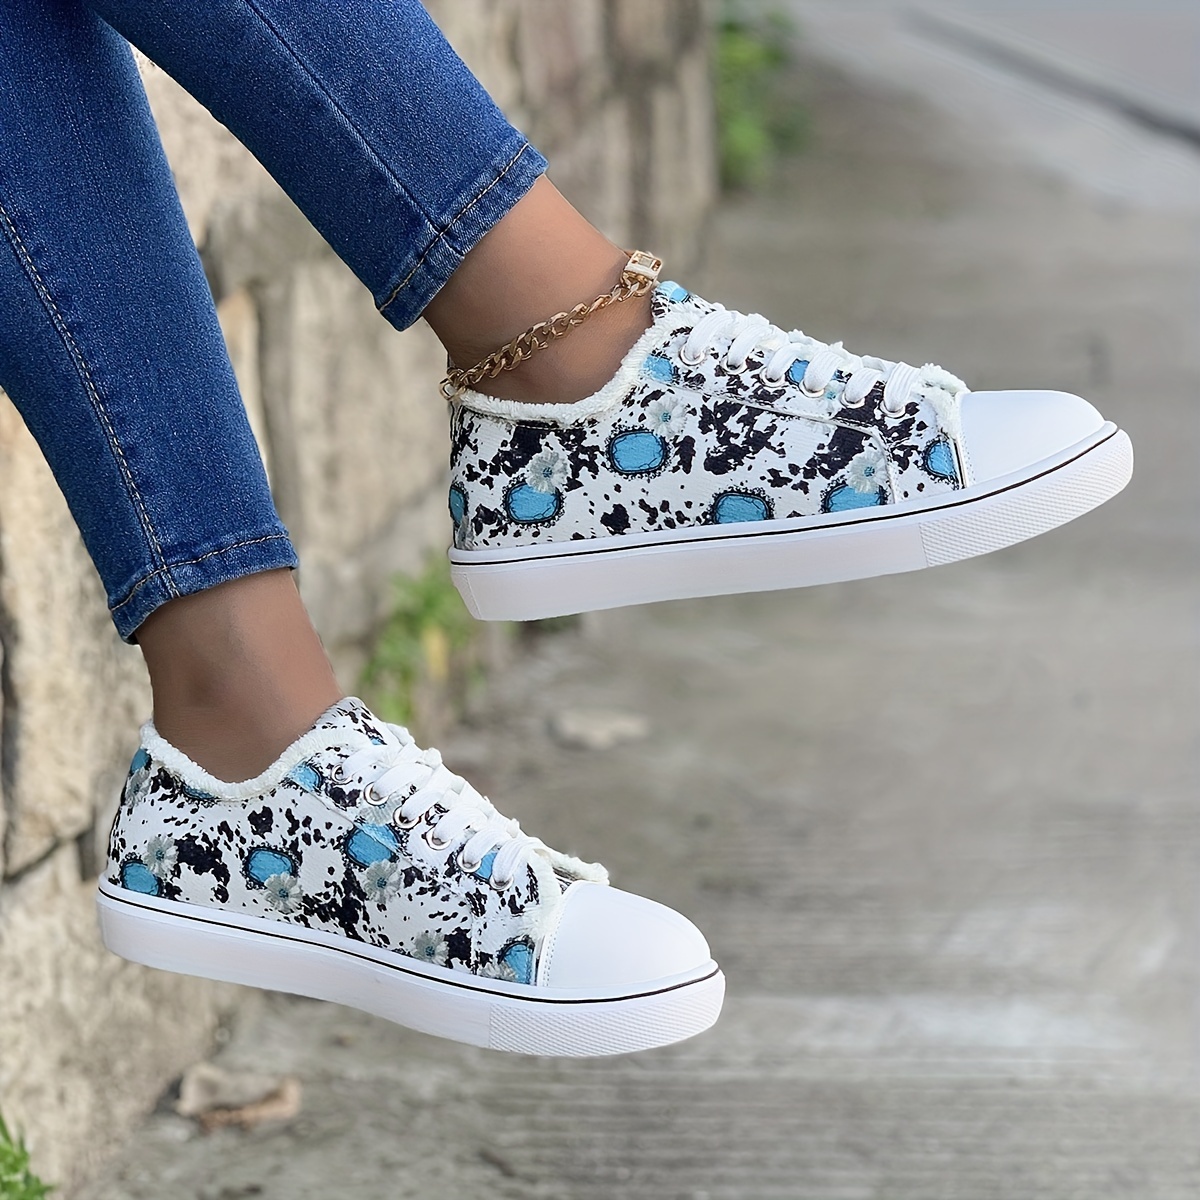  Womens Fashion Sneakers Embroidery Floral Sheer Low